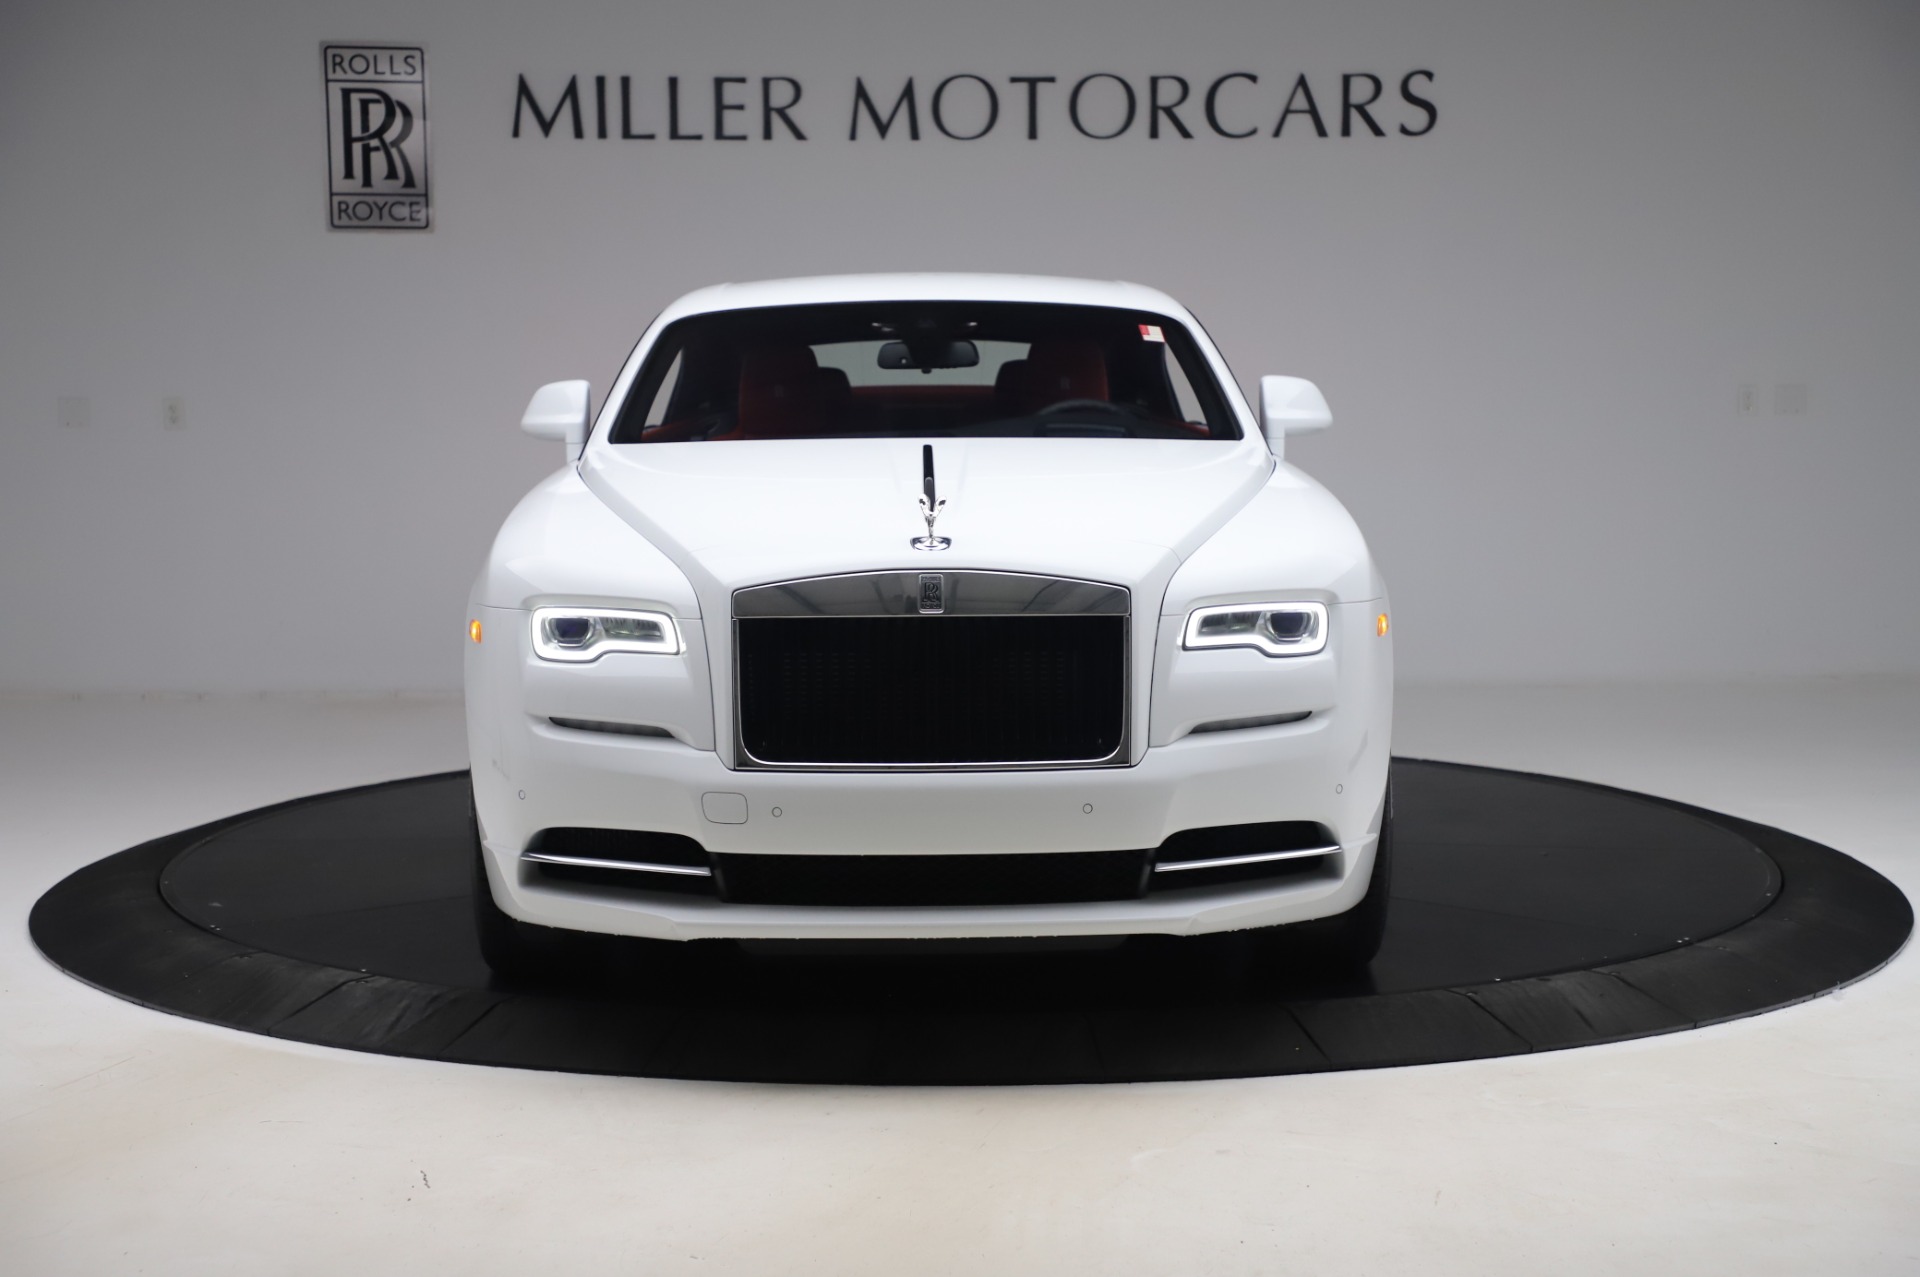 2009 RollsRoyce Phantom Coupe Review Trims Specs Price New Interior  Features Exterior Design and Specifications  CarBuzz